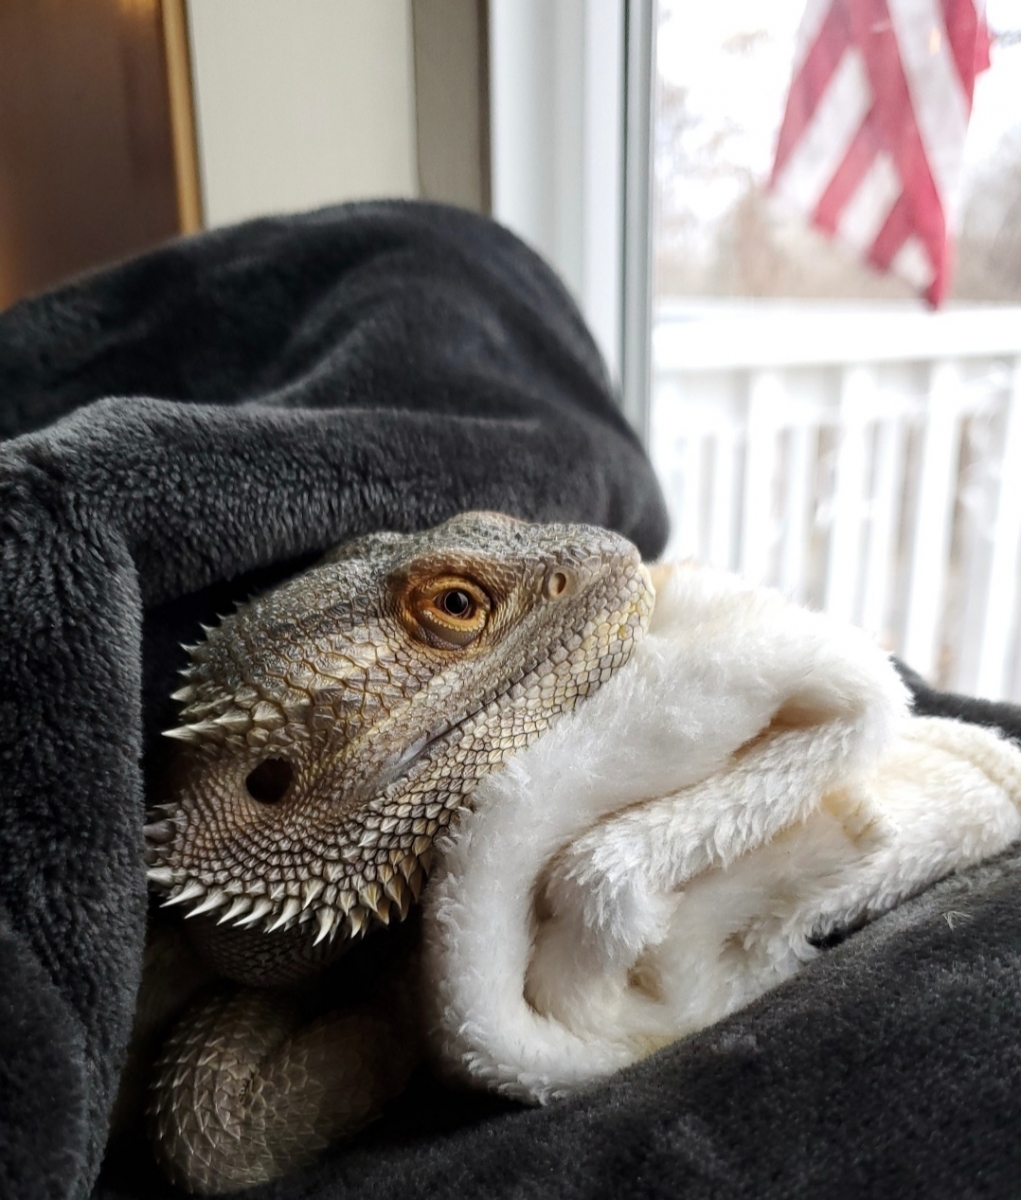 MY BEARDED DRAGON ELLIOT, ENJOYING LOOKING OUT THE WINDOW WHILE HE IS COZY IN HIS BLANKETS., Stacy Williams